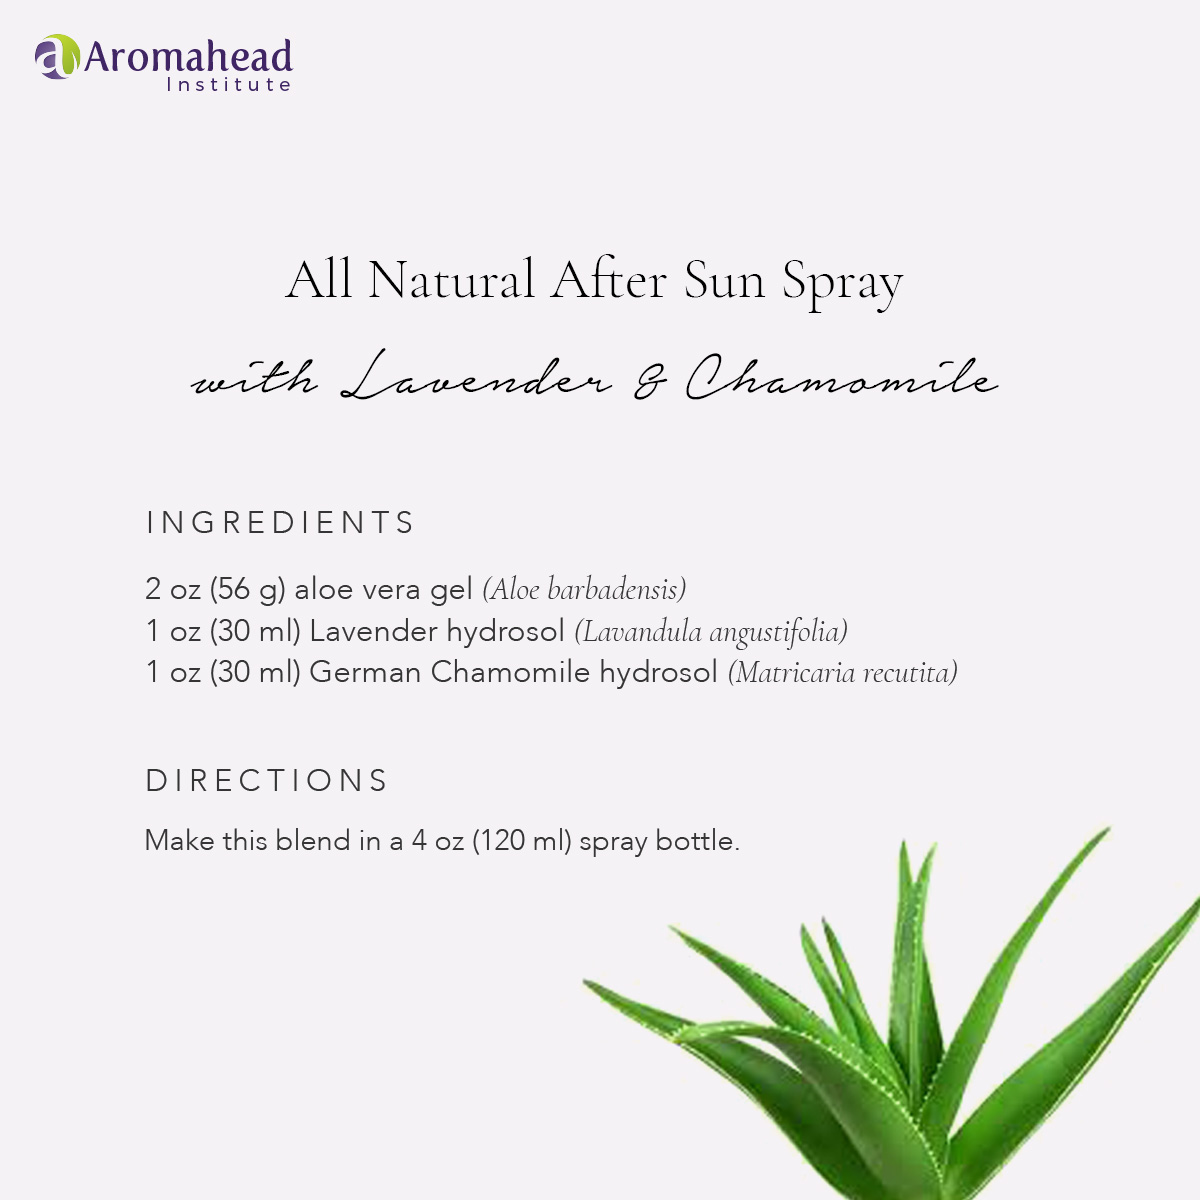 blog - May 4 - title -All Natural After Sun Spray with Lavender and Chamomile - 1200 x 1200 - V1  